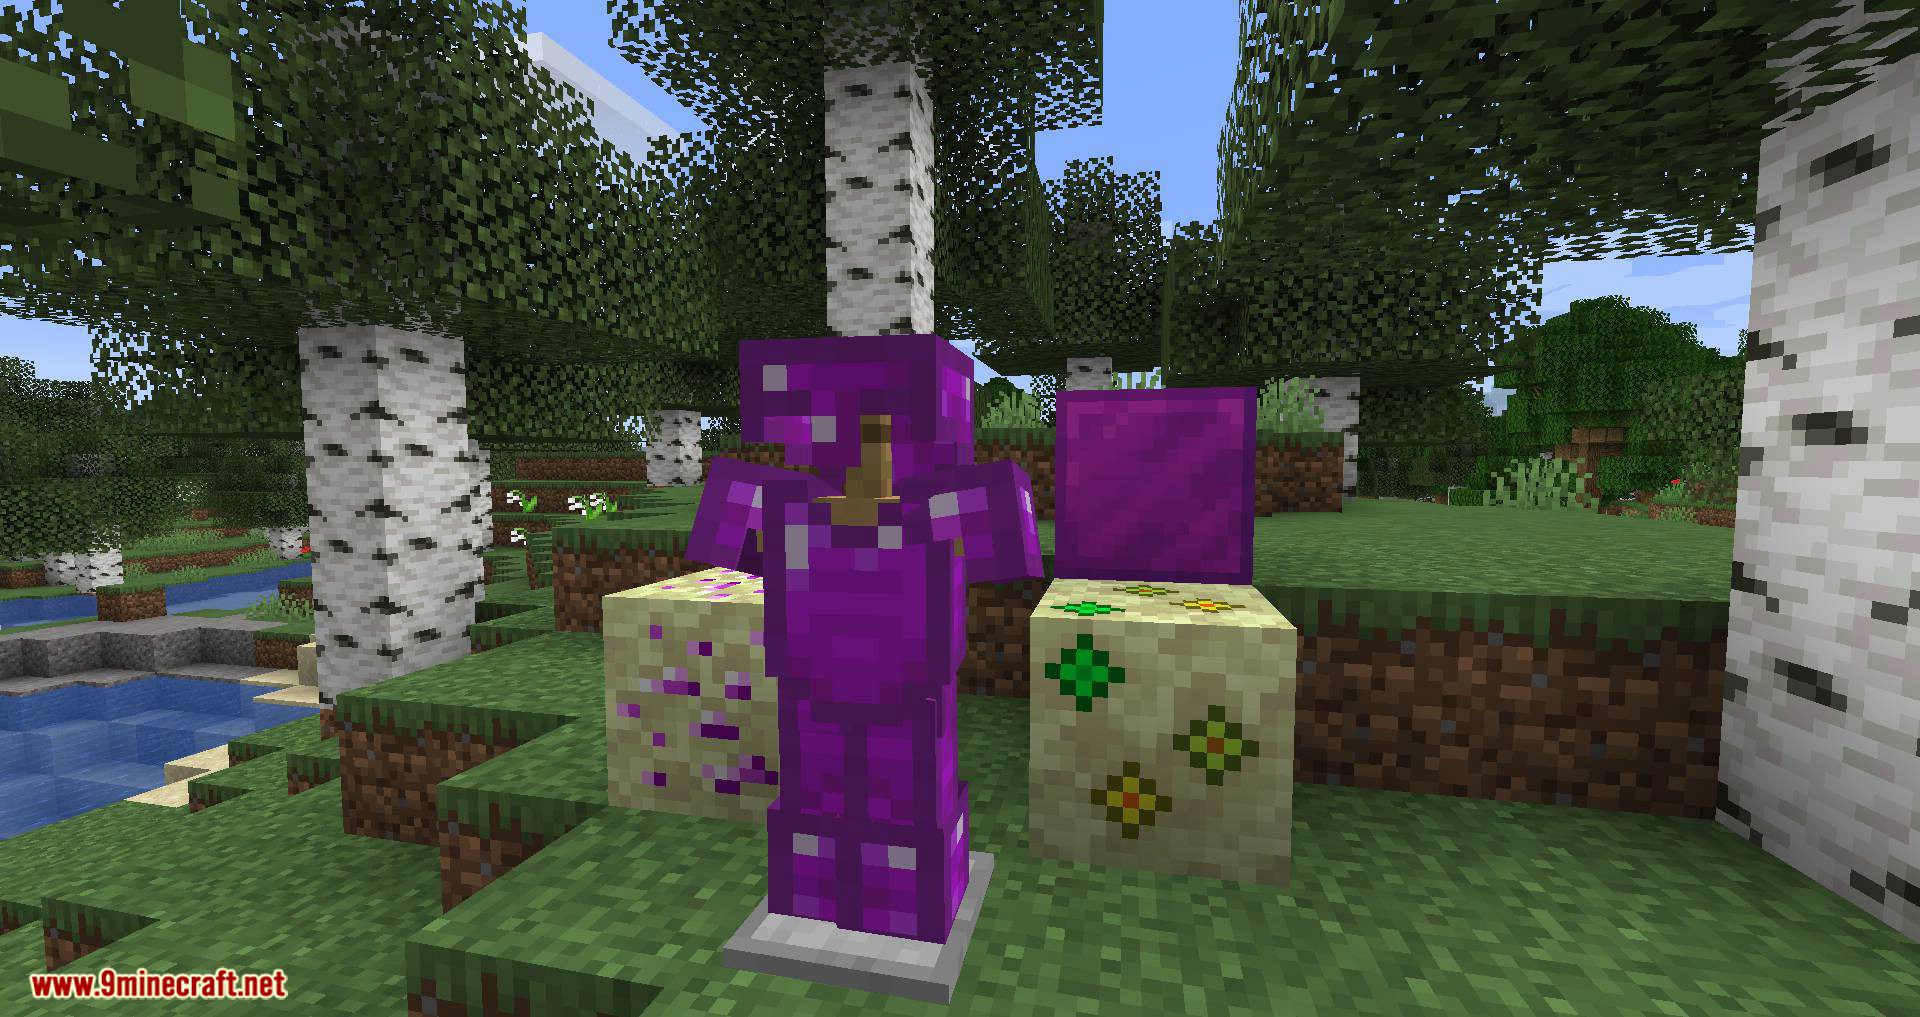 More Ores In ONE Mod (1.19.2, 1.18.2) - Ores in the Overworld, Nether, and End 17